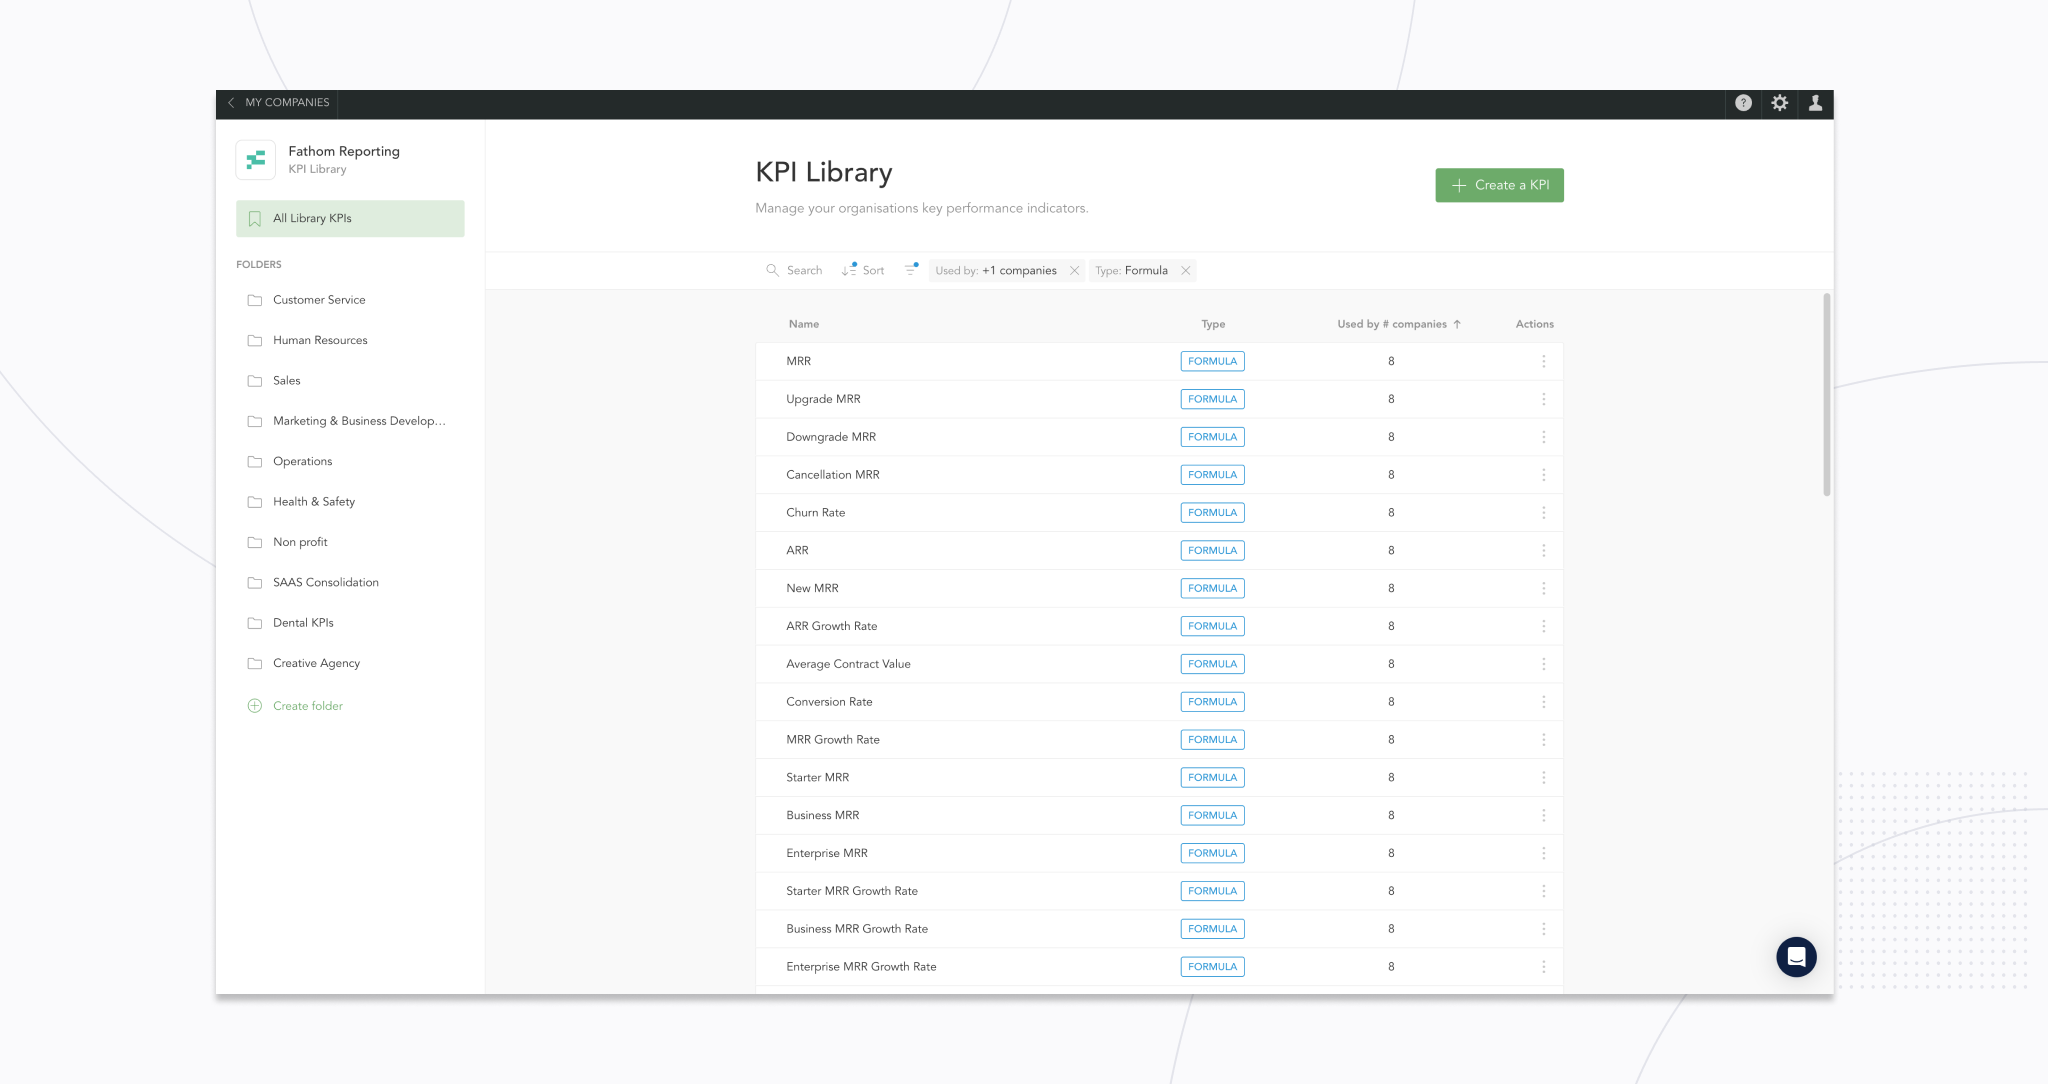 KPI Library – Search Sort Filter